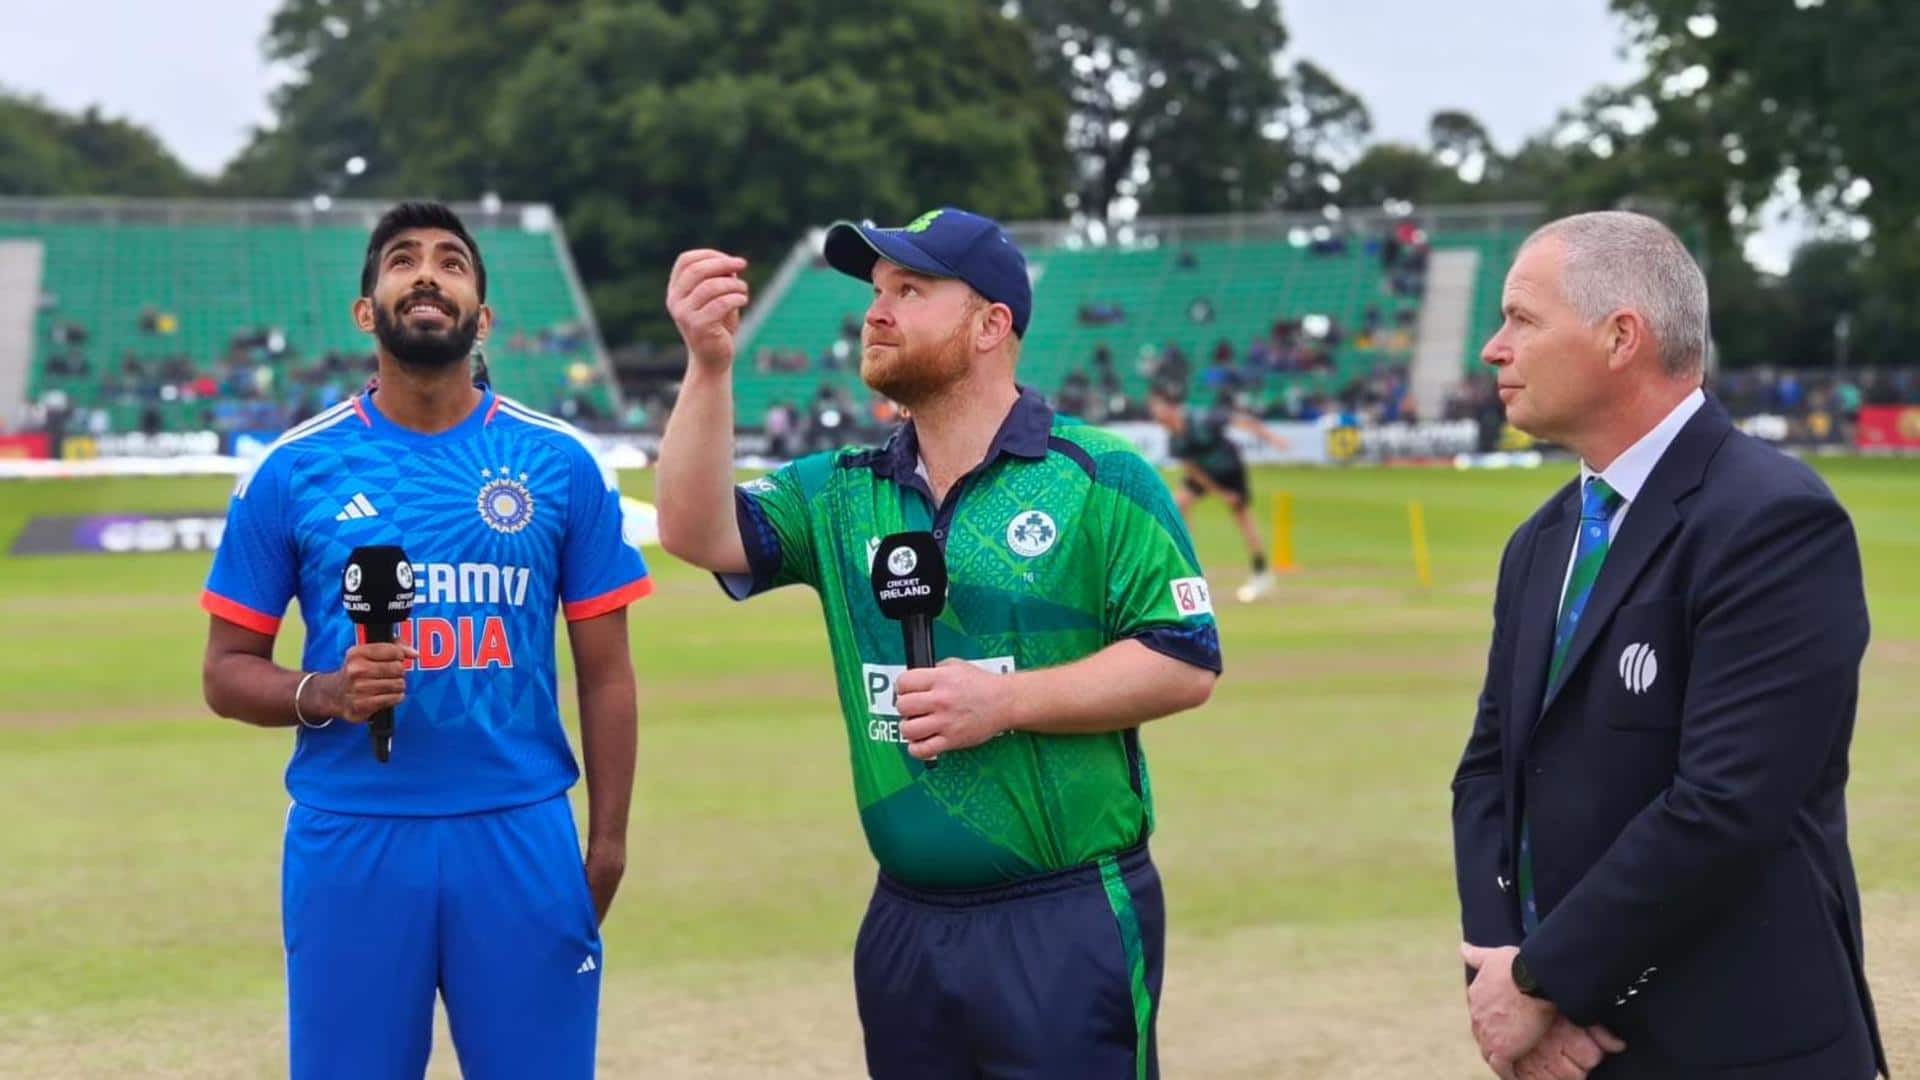 1st T20I: McCarthy's fifty powers Ireland to 139/7 versus India